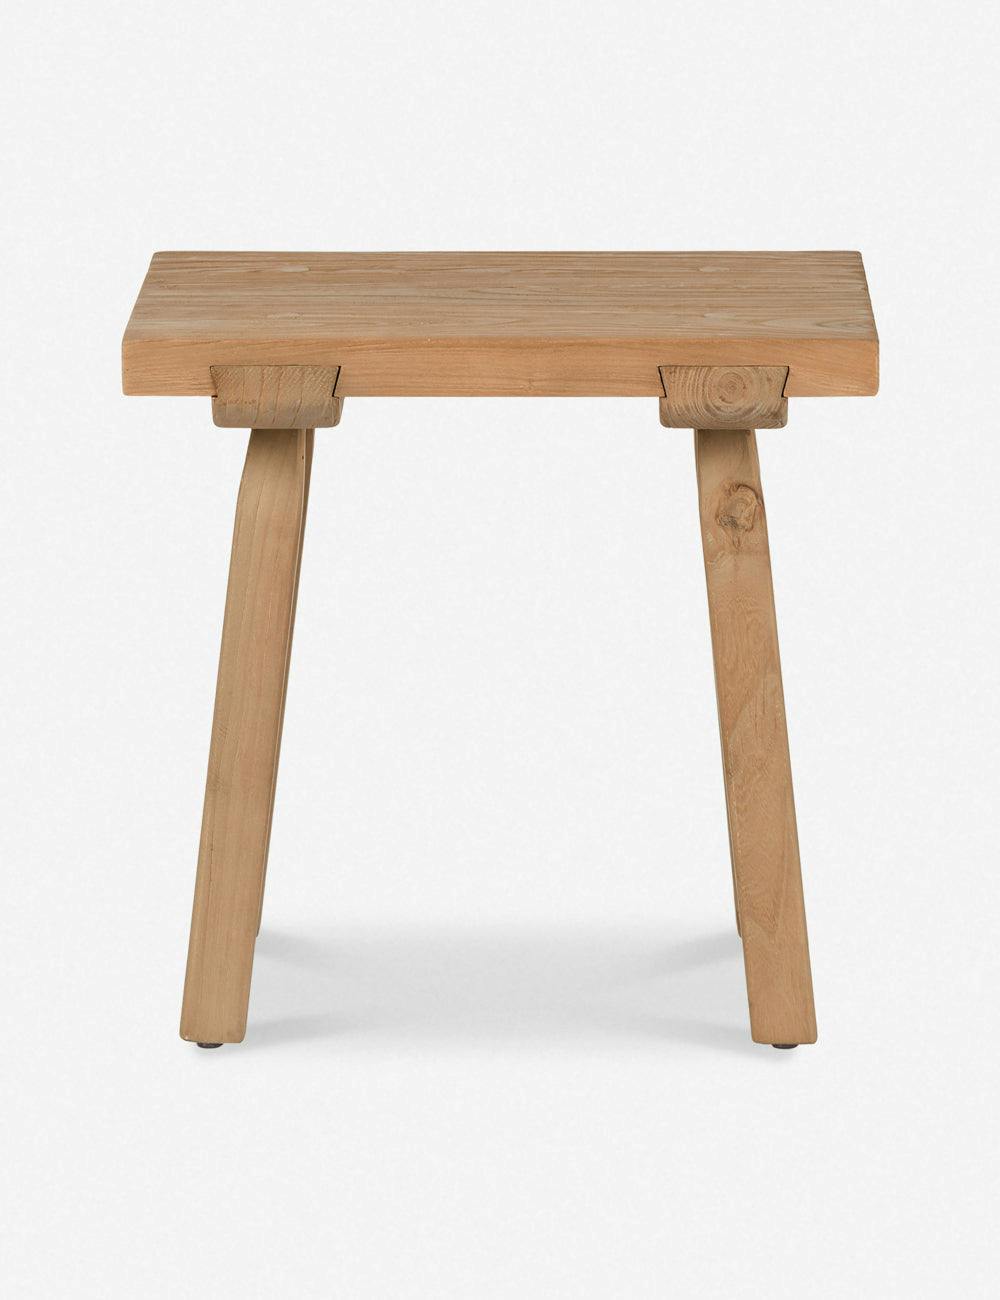 Rustic Elmwood Tapered Leg French Farmhouse Stool - Natural